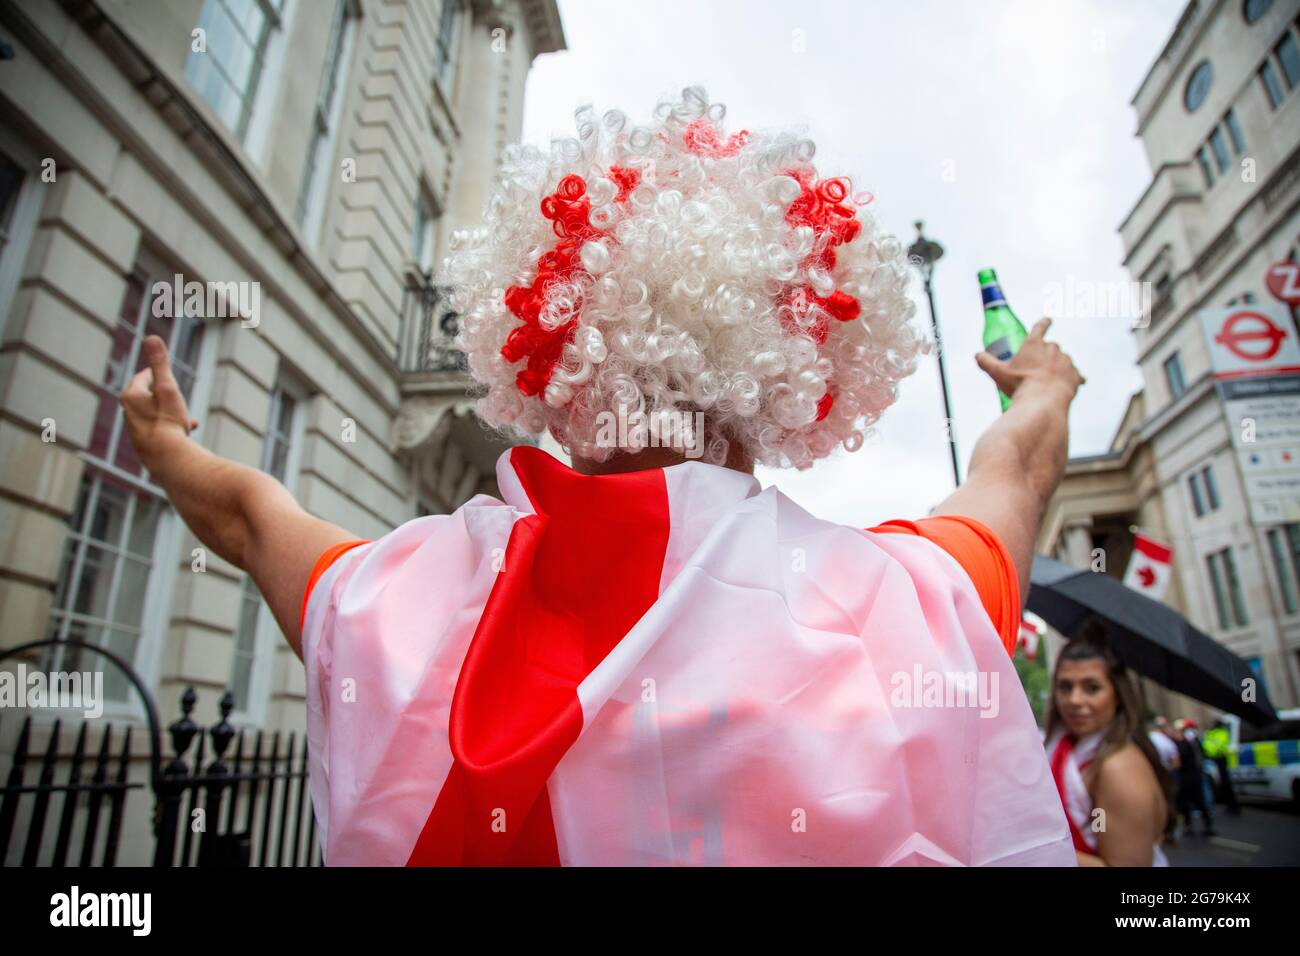 An England fan wearing a wig and an England flag ahead of the Euro 2020 Final England vs. Italy Stock Photo